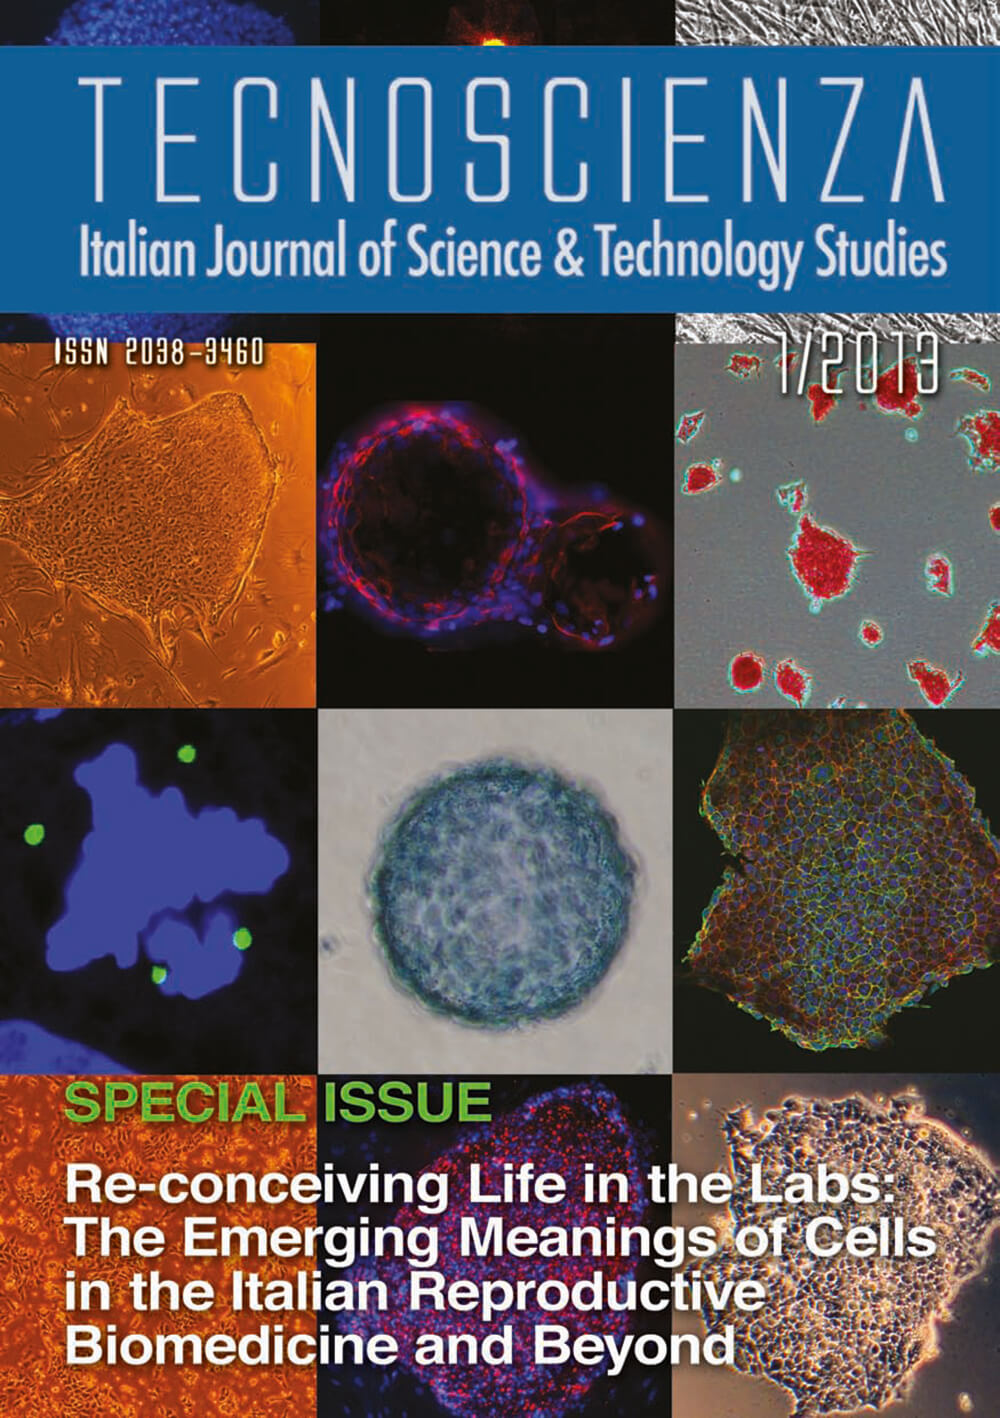 "Smile of a Stem Cell: A Dialogue between Science and Society" by Cattaneo Lab. Cover of Tecnoscienza number 7 (1st Issue, Year 2013)